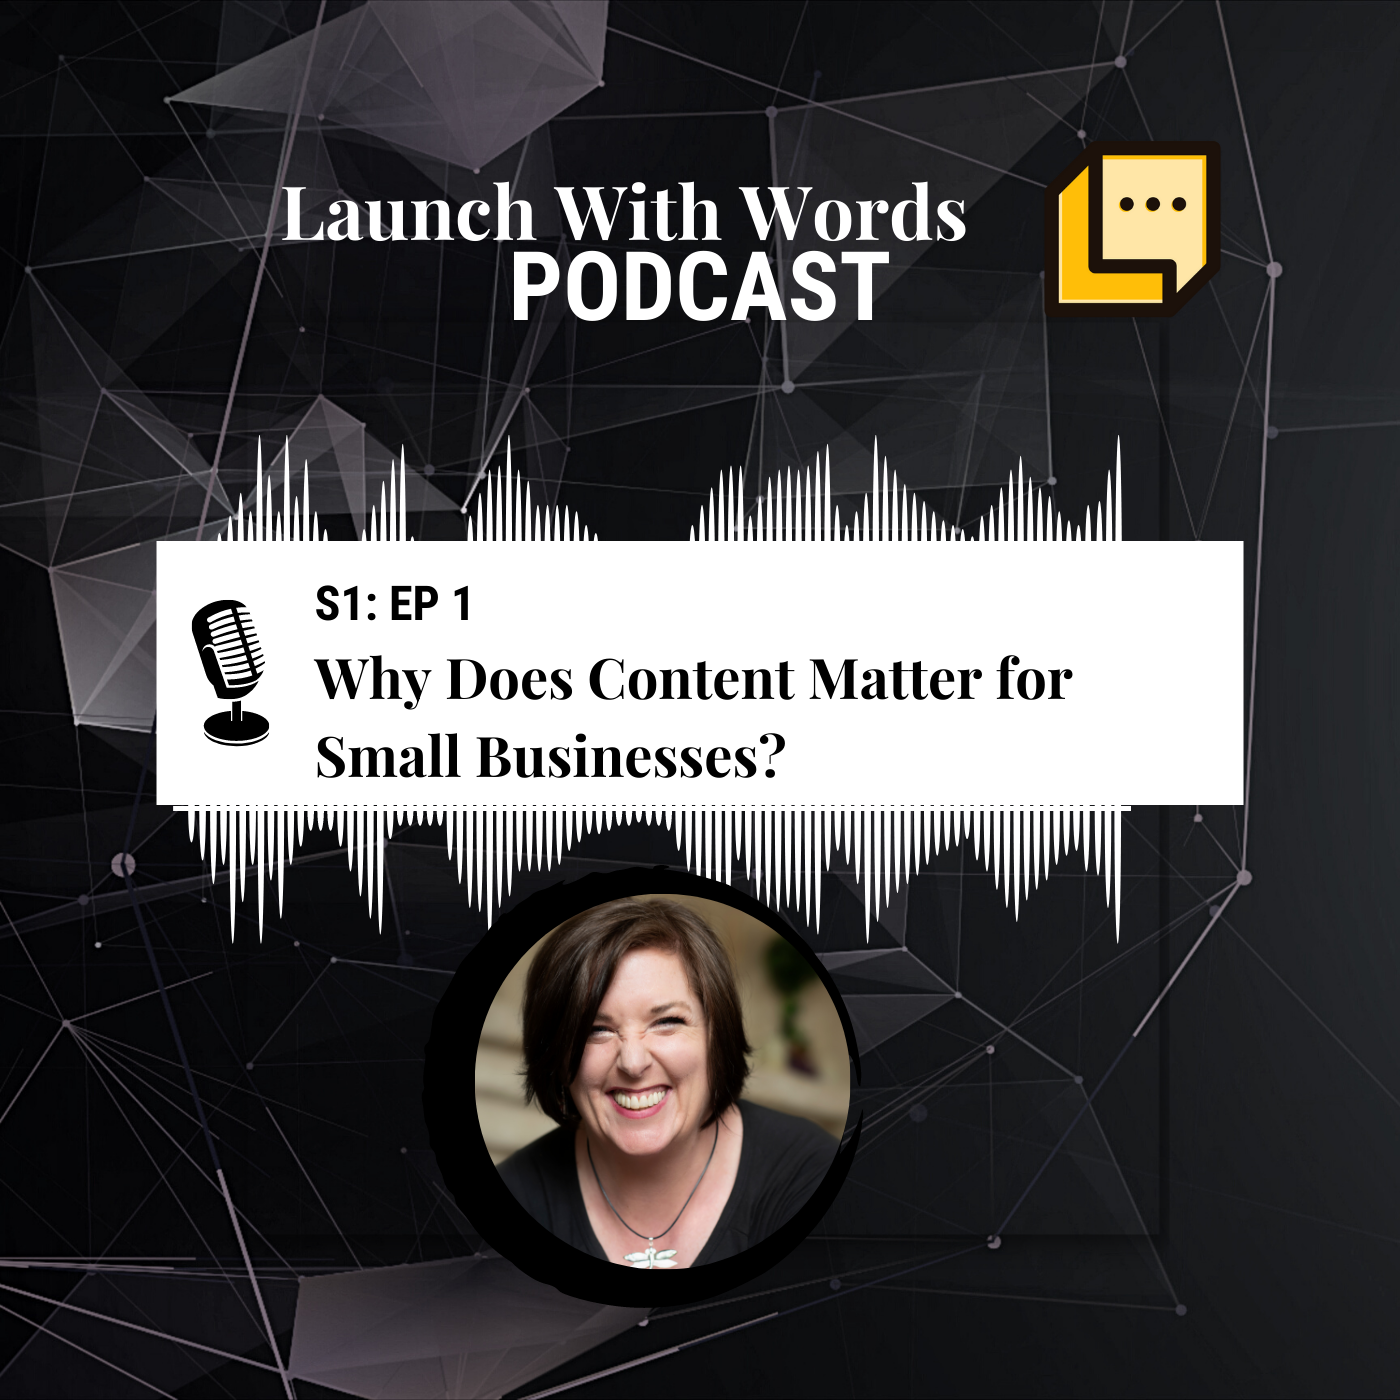 Why Does Content Matter for Small Businesses?